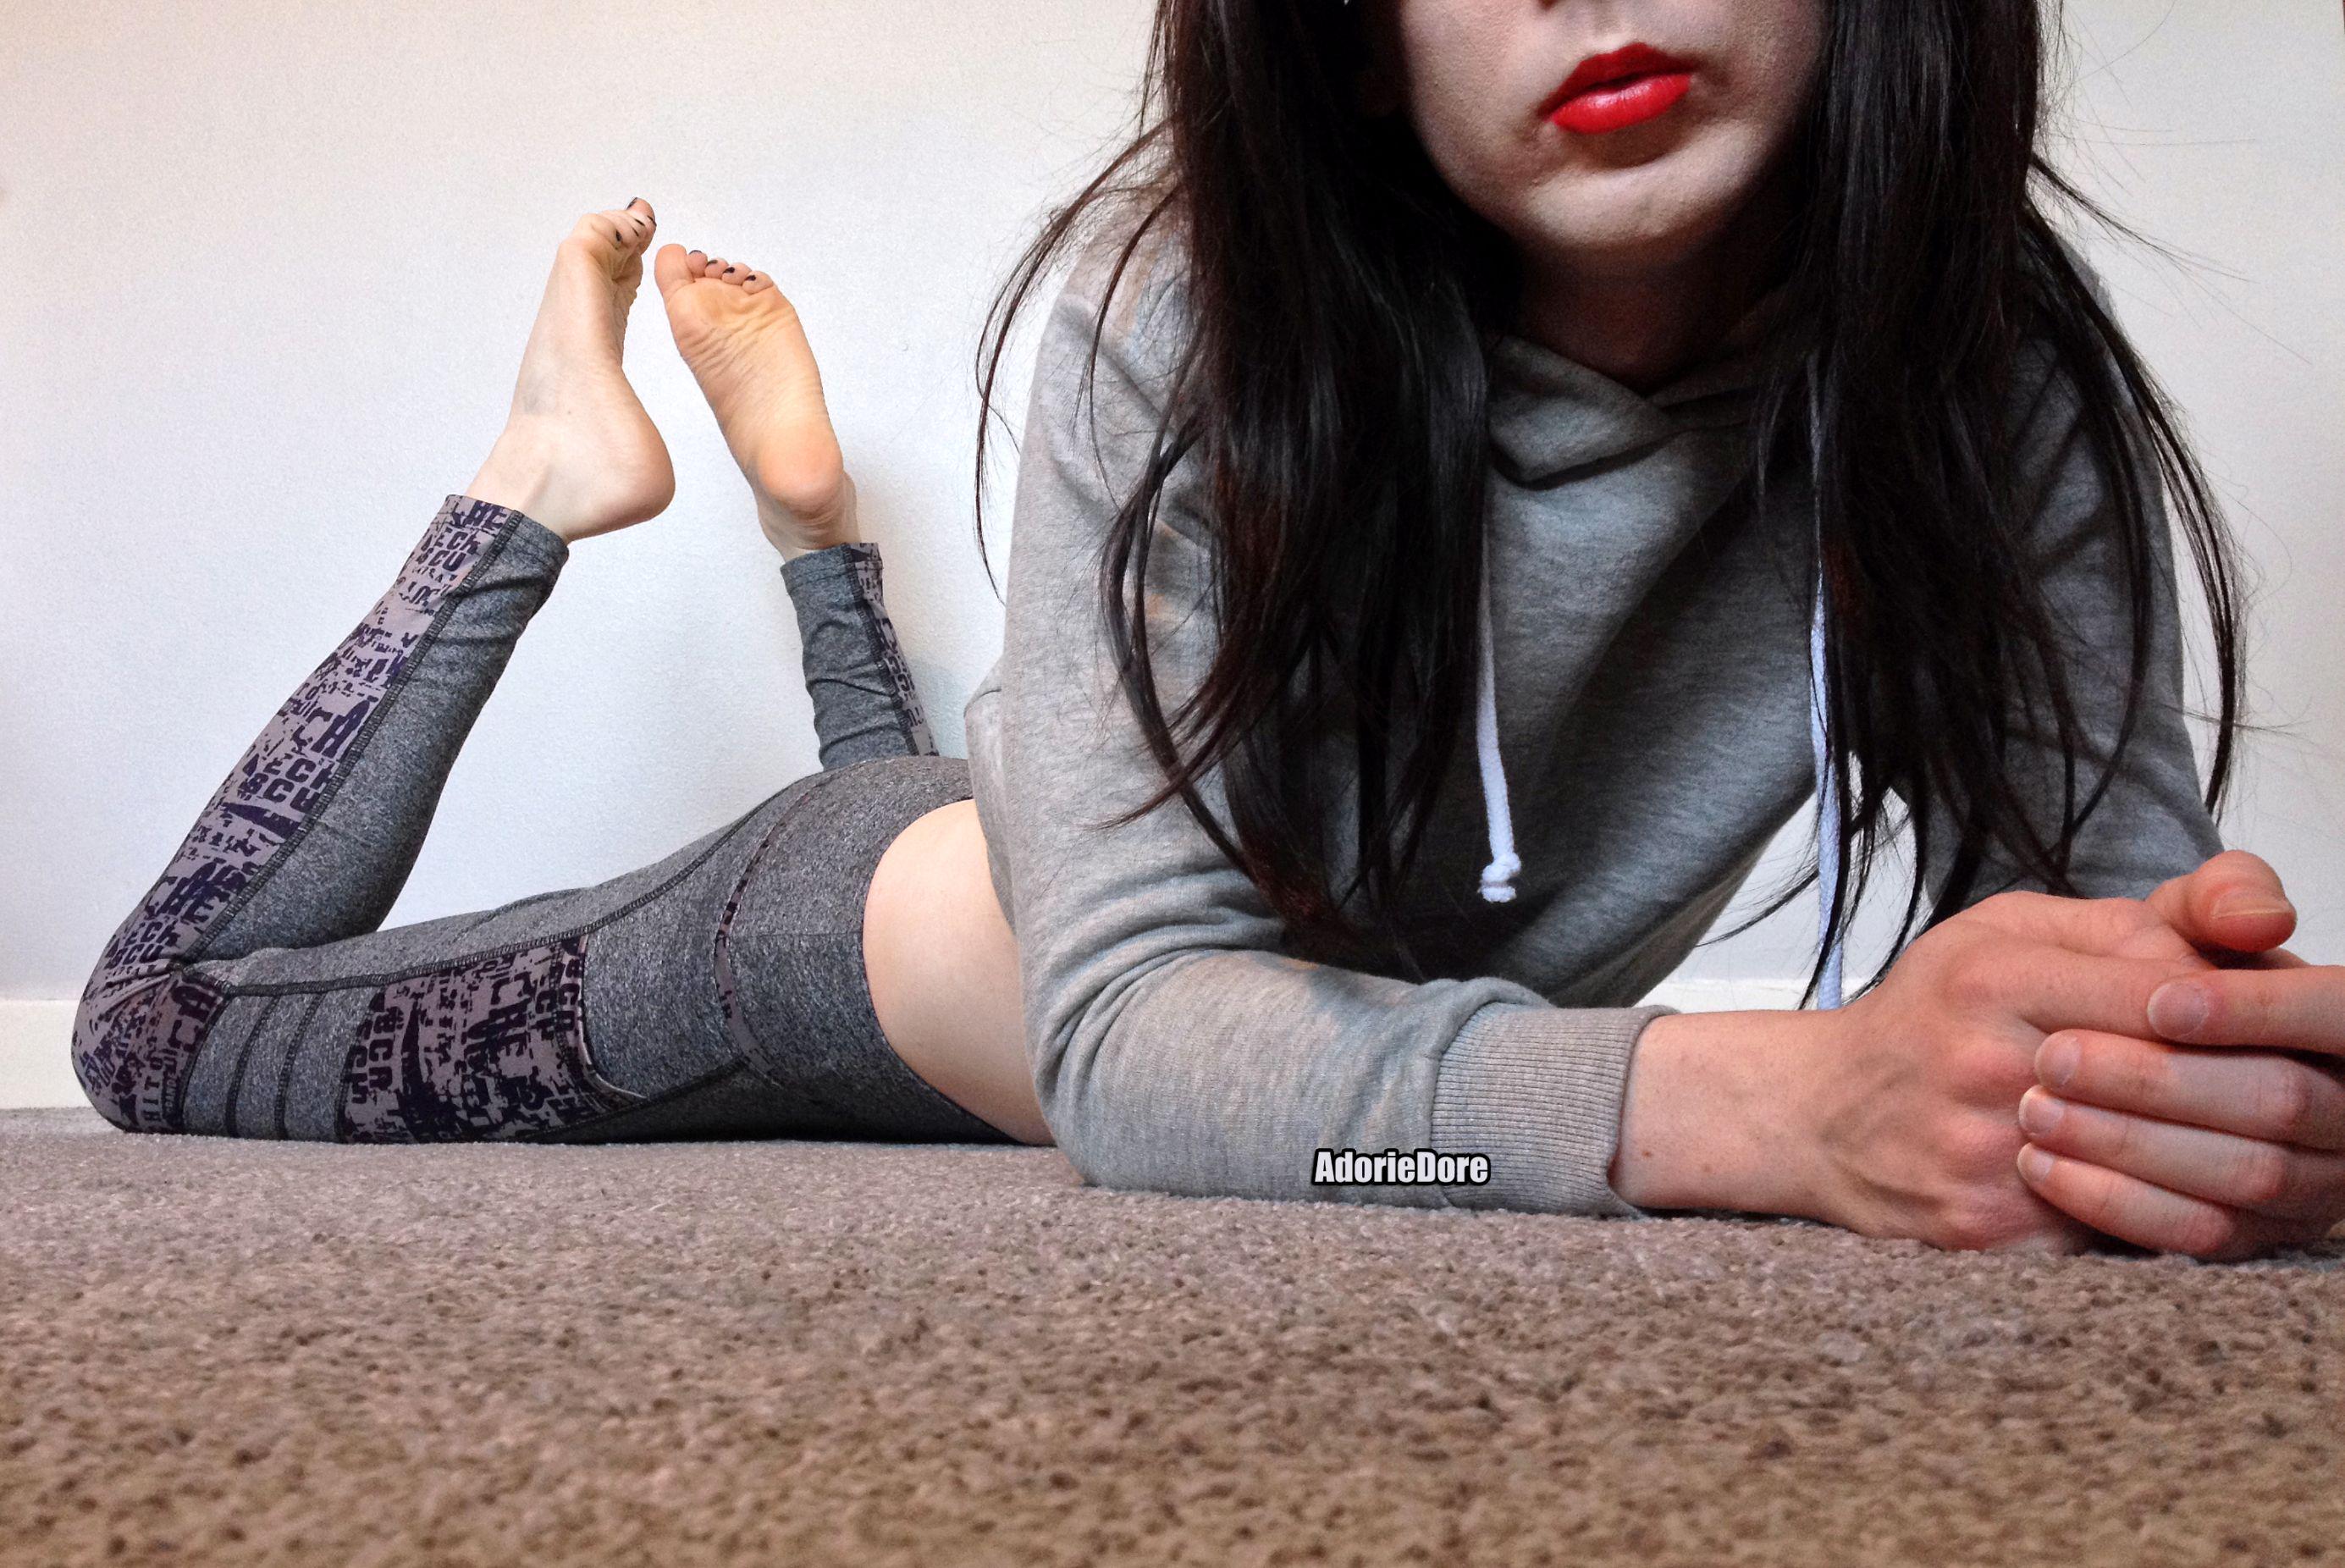 Let me suck you while you stare at my feet